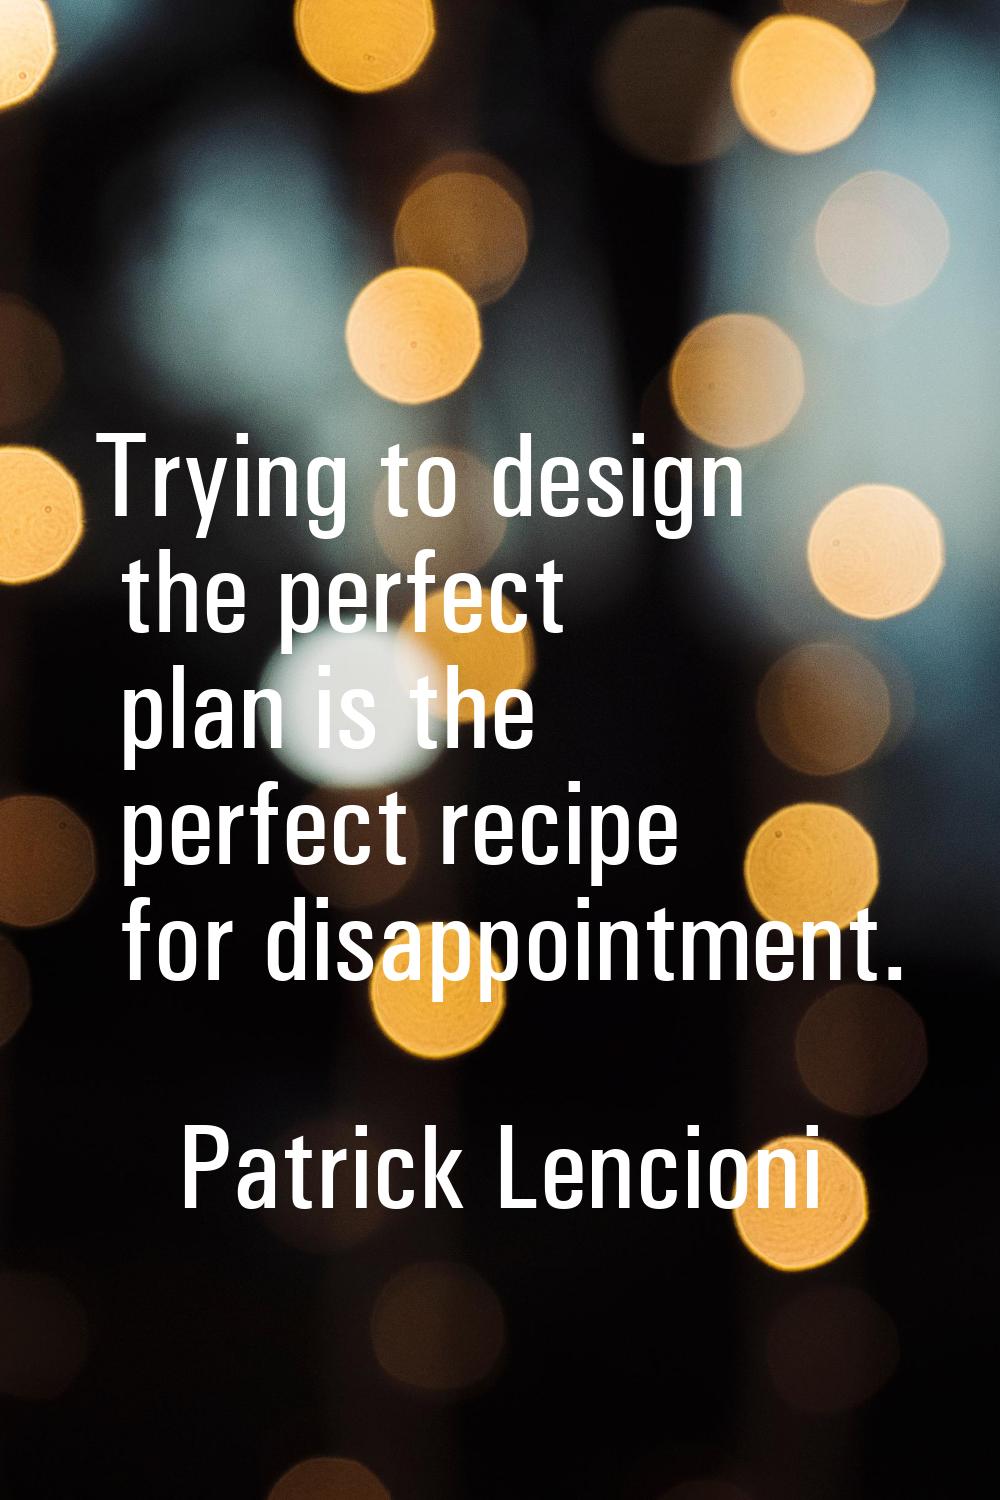 Trying to design the perfect plan is the perfect recipe for disappointment.